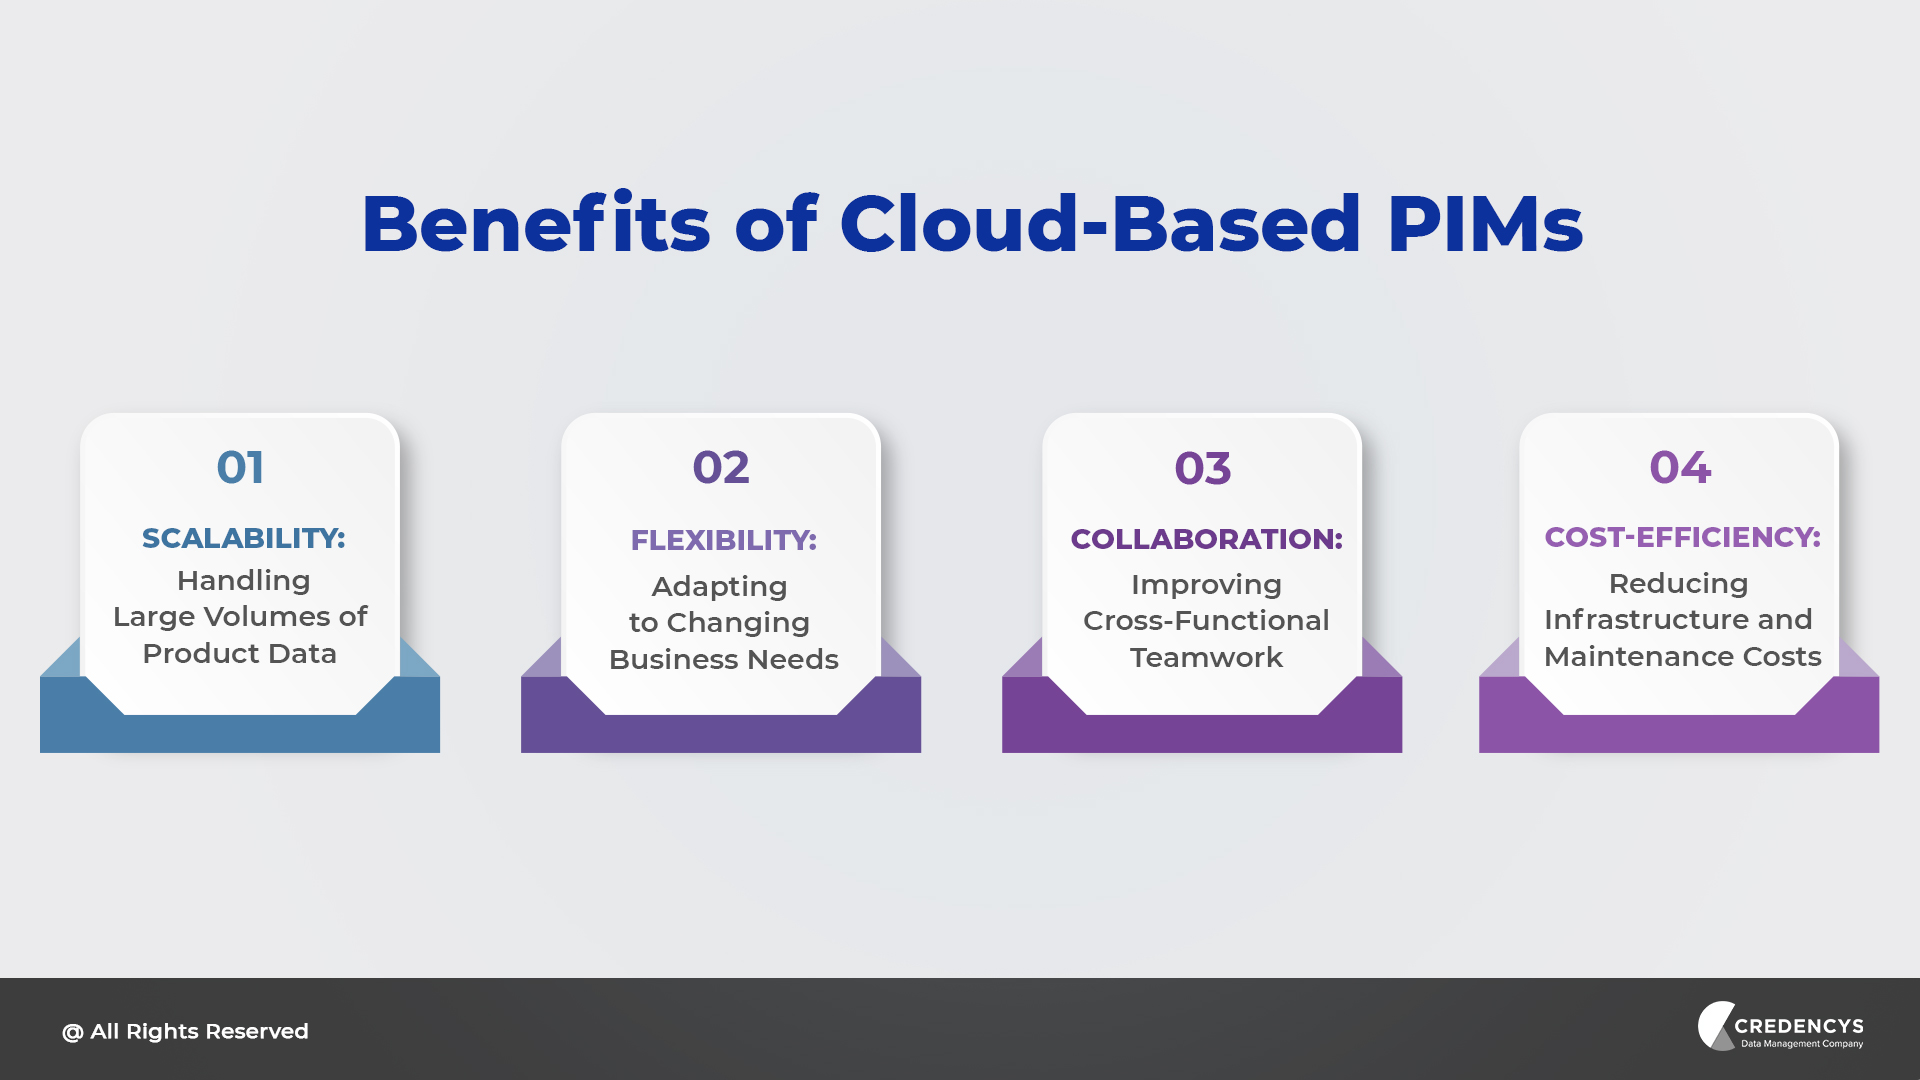 Benefits of Cloud-Based PIMs